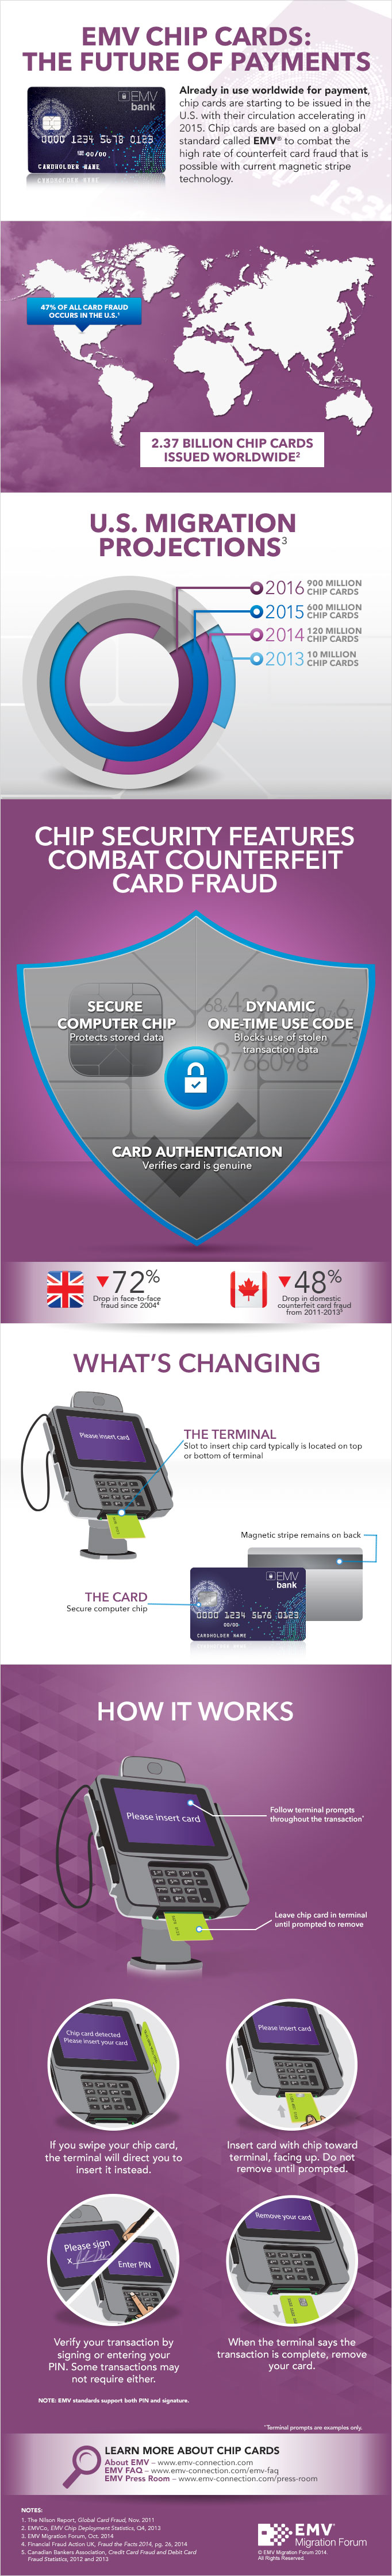 EMV Chip Cards  EMV Payment Cards Supplier - IdentiSys